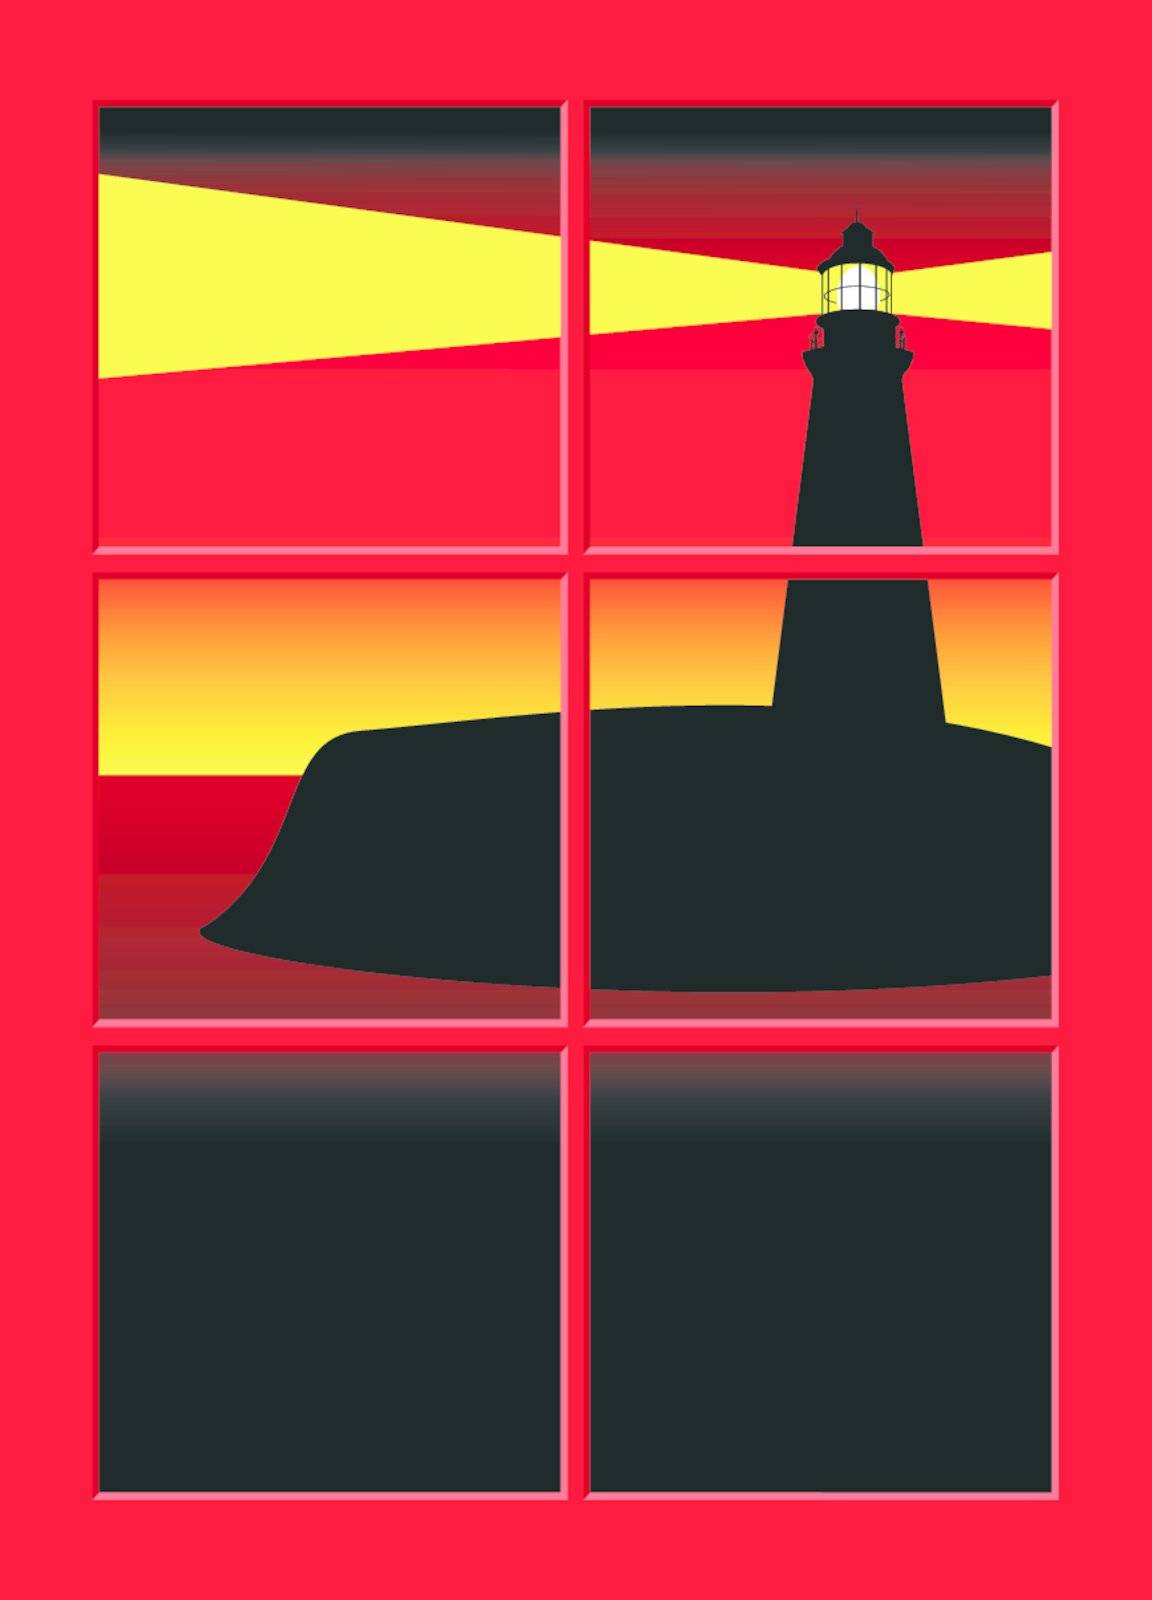 Illustration of a lighthouse seen through a window at sunset